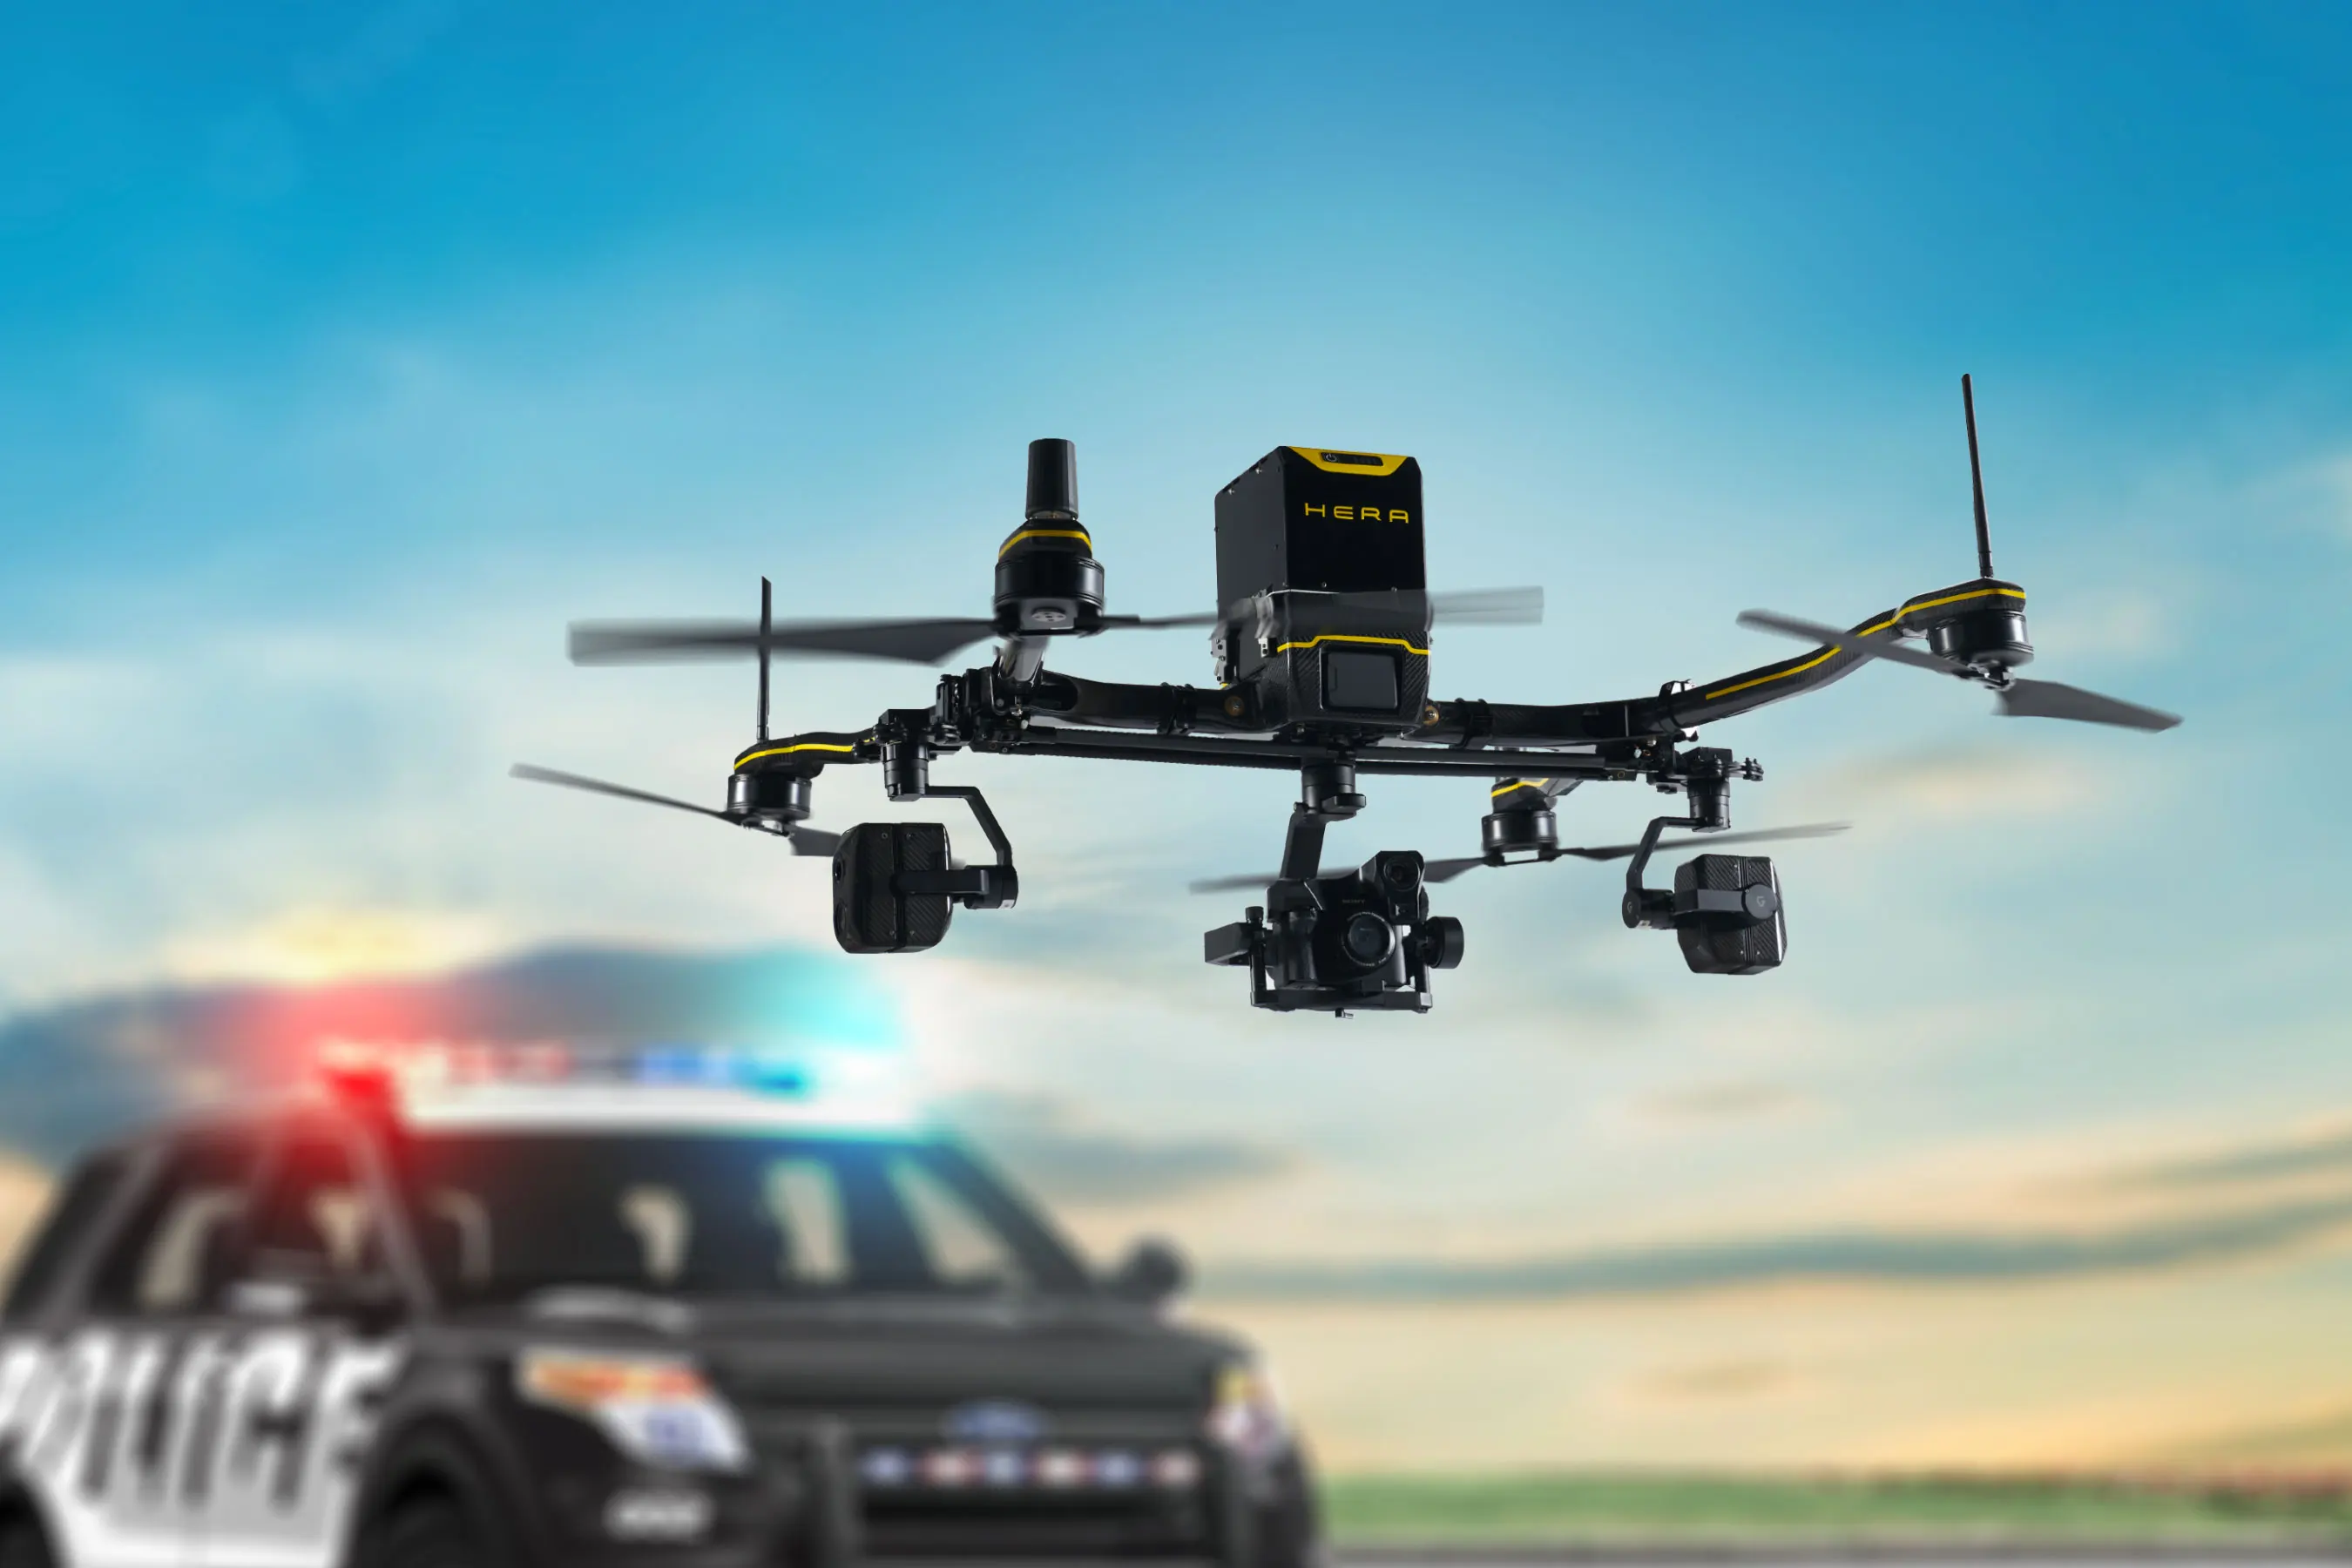 A RMUS Heavy Duty Law Enforcement Drone Flying in front of a police car.